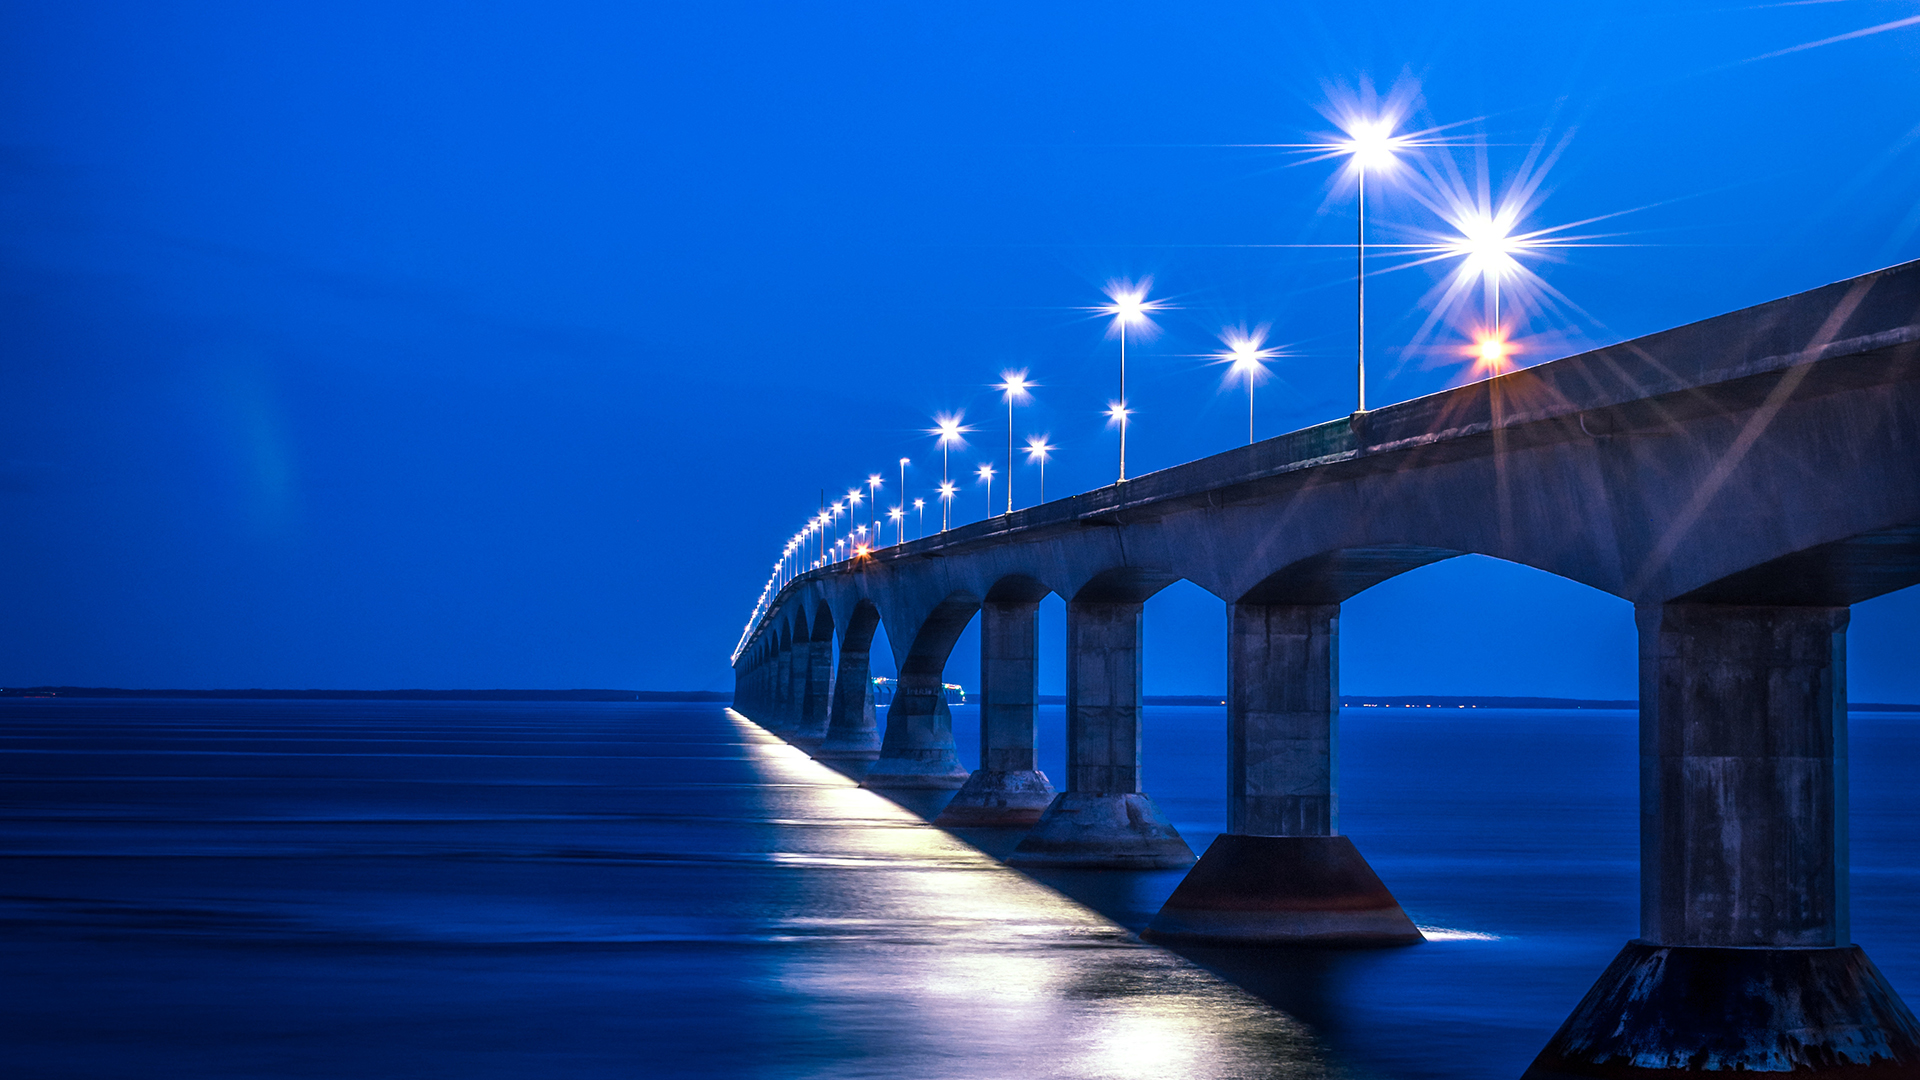 A bridge over water with lights at night